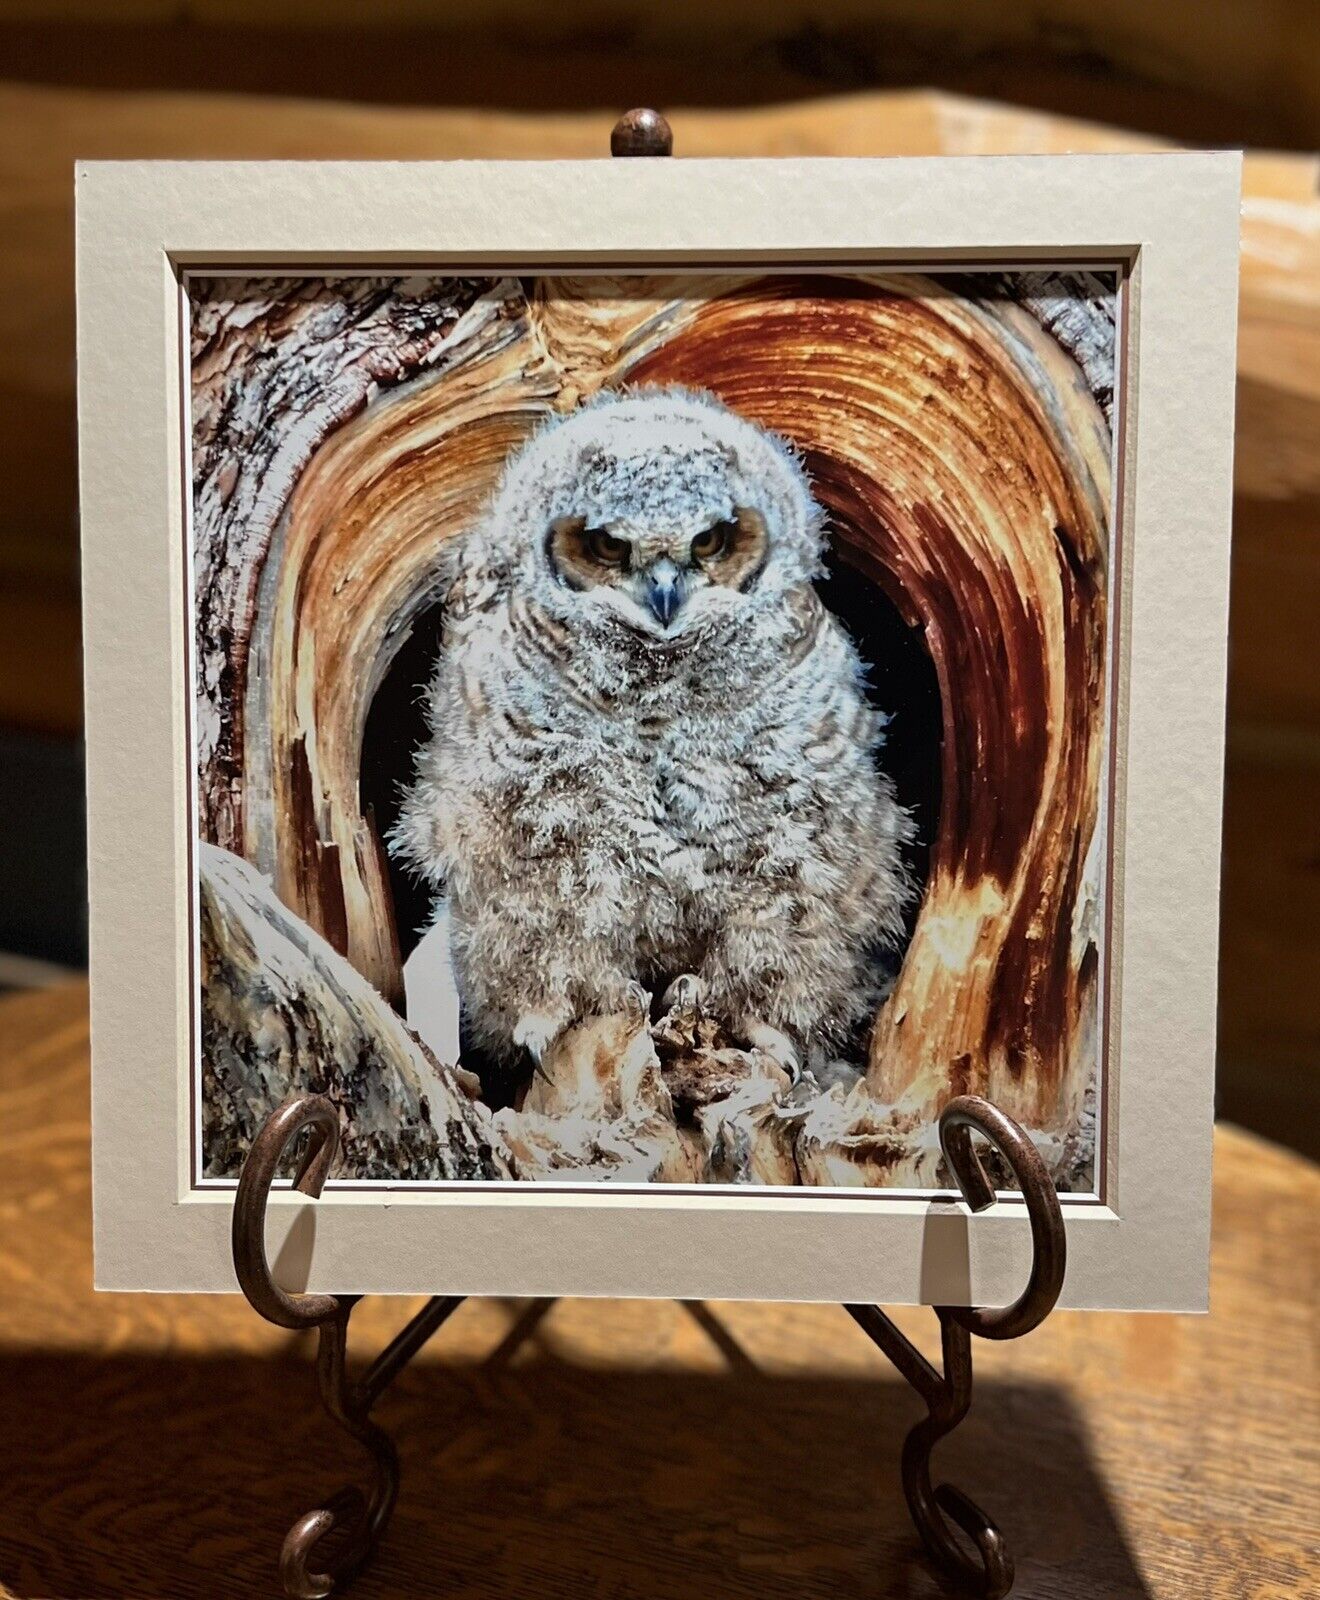 12 X 12 Photo Near RMNP Fledgling Owlet in Tree Nest Double Mats Ready to Frame